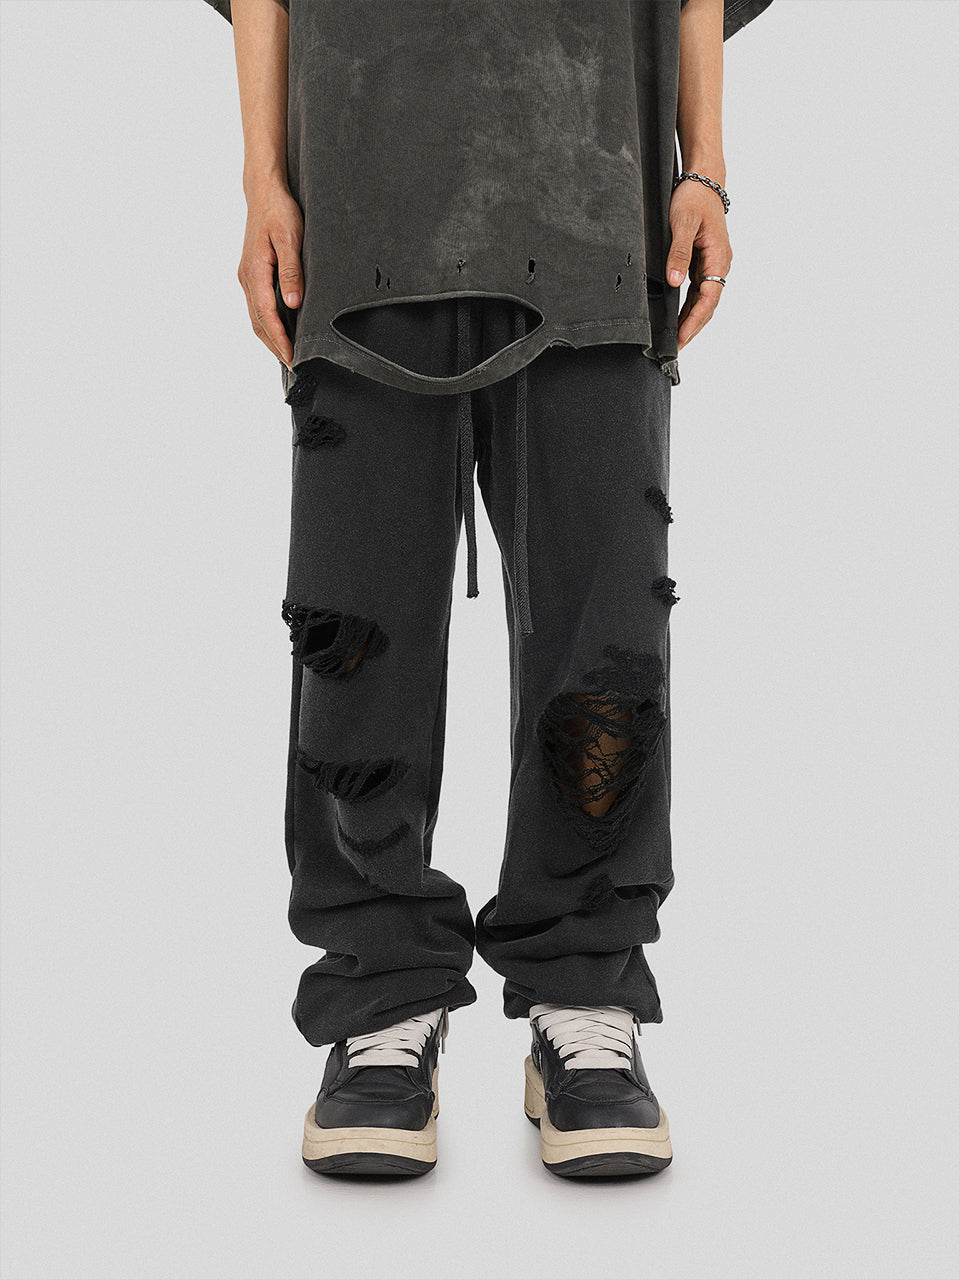 UNDERWATER Destroyed Messy Needle Embroidery Sweatpants